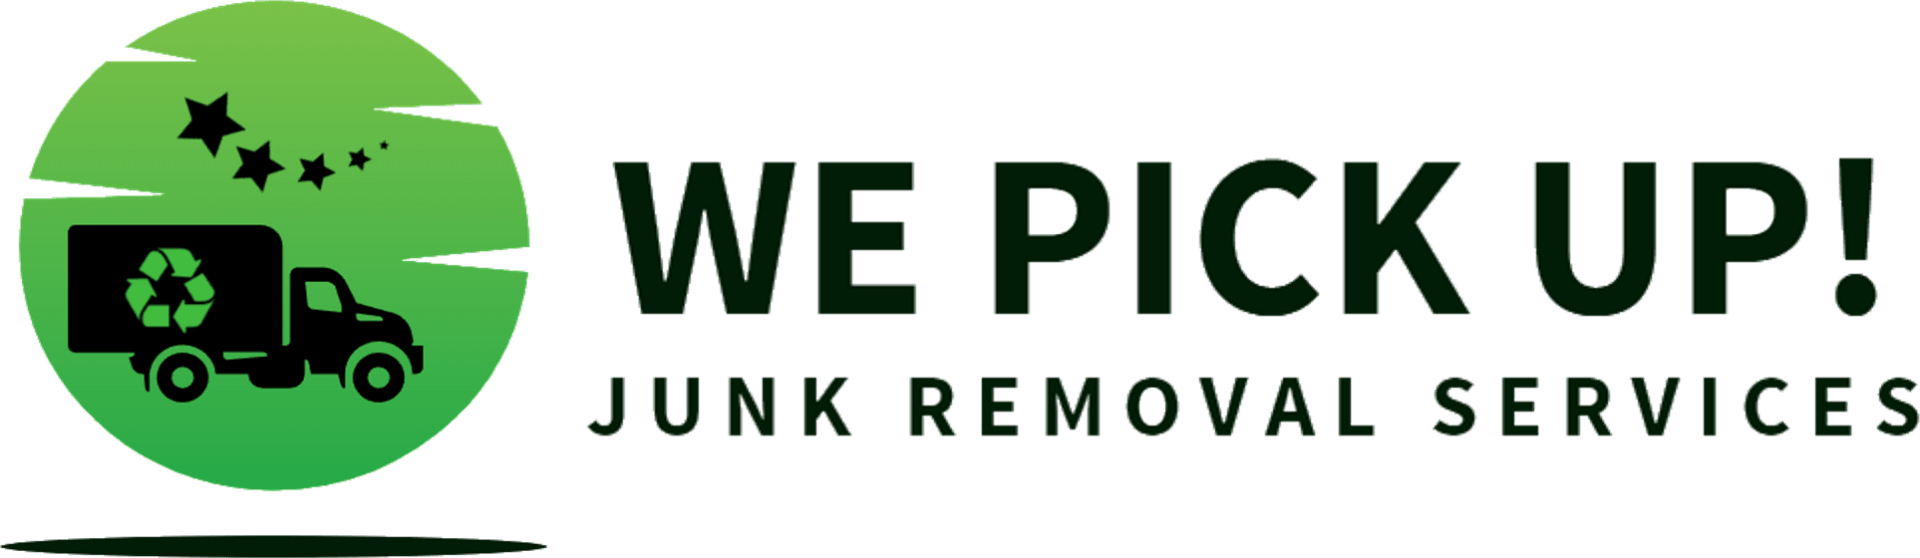 We Pick Up - Junk Removal Services